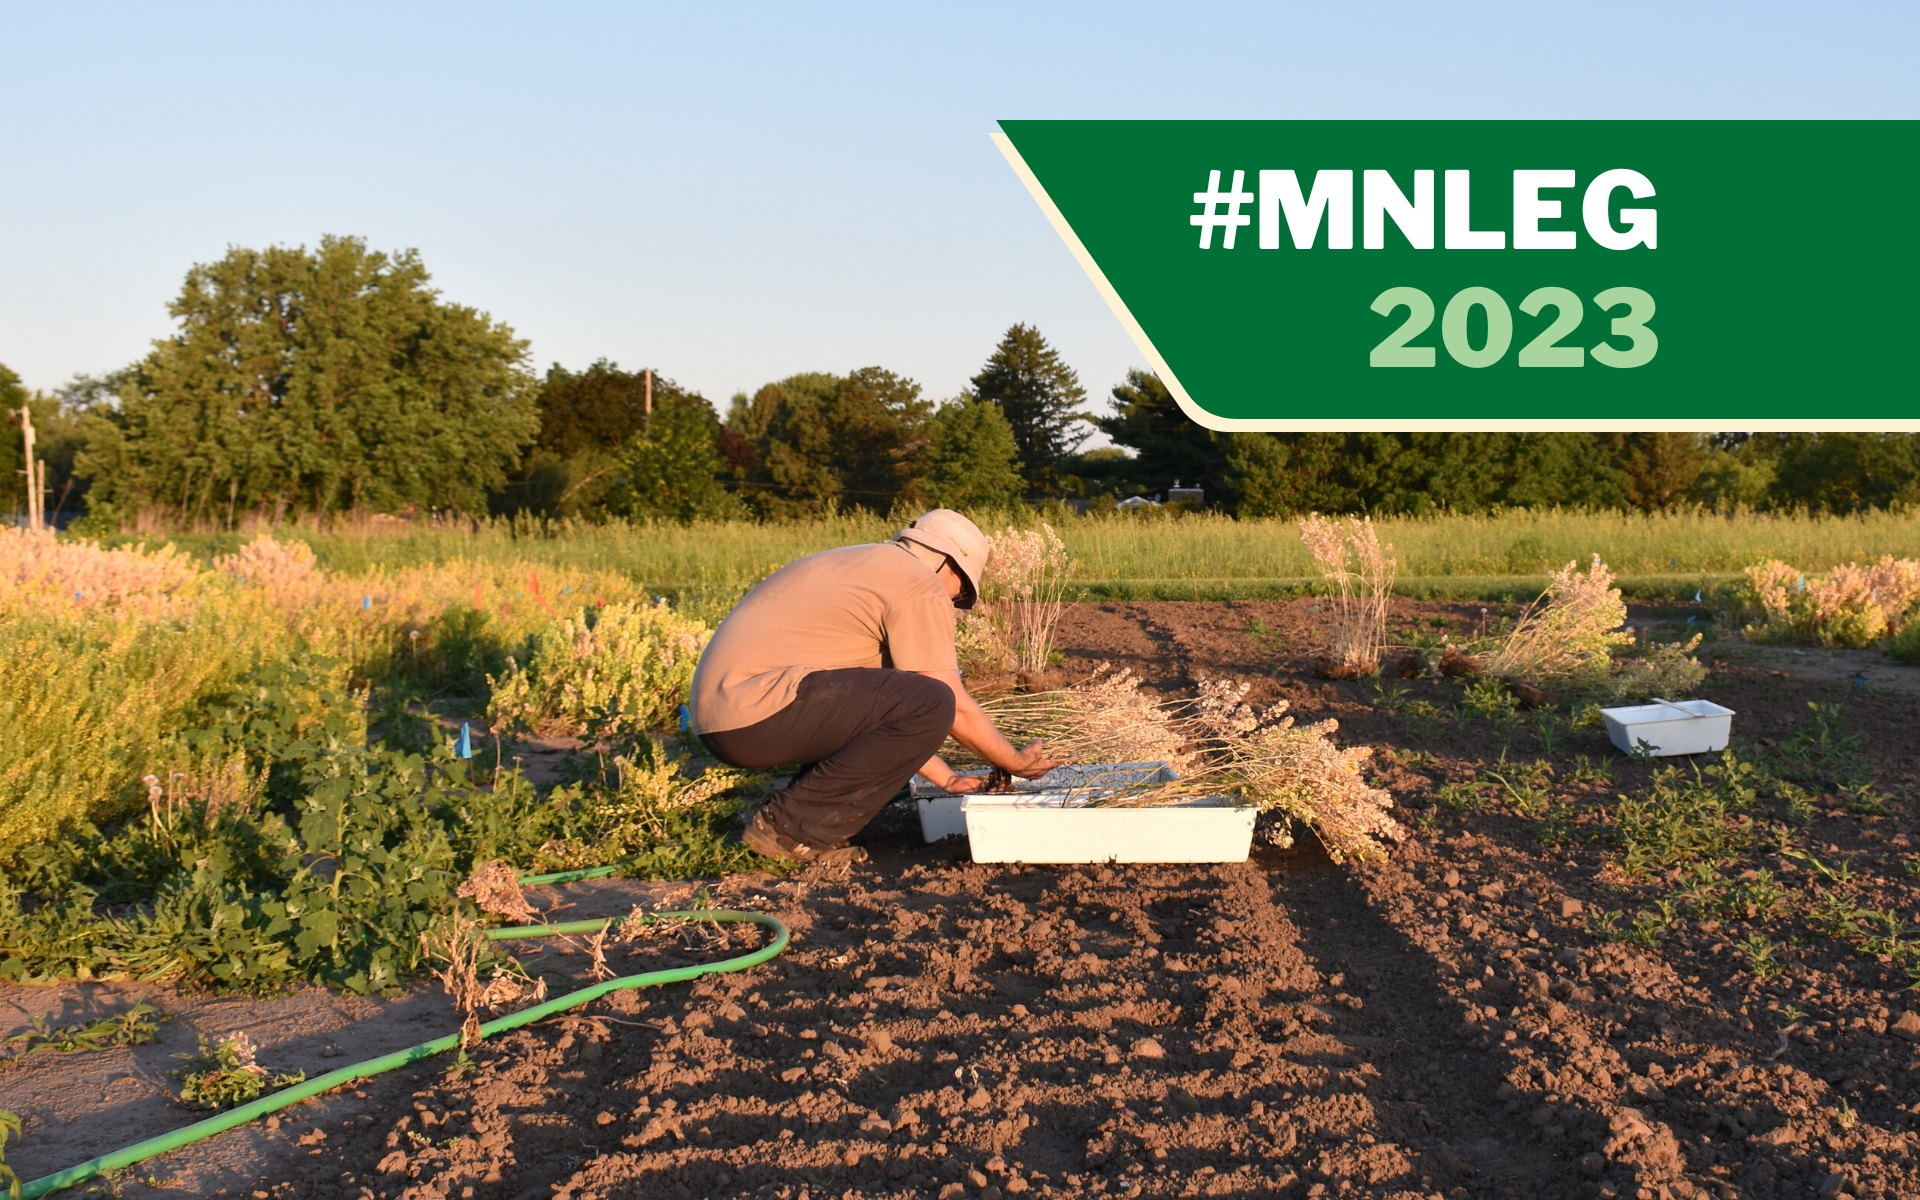 A crop researcher with the University of Minnesota crouches in a field, using a hose to rinse off the roots of plants.